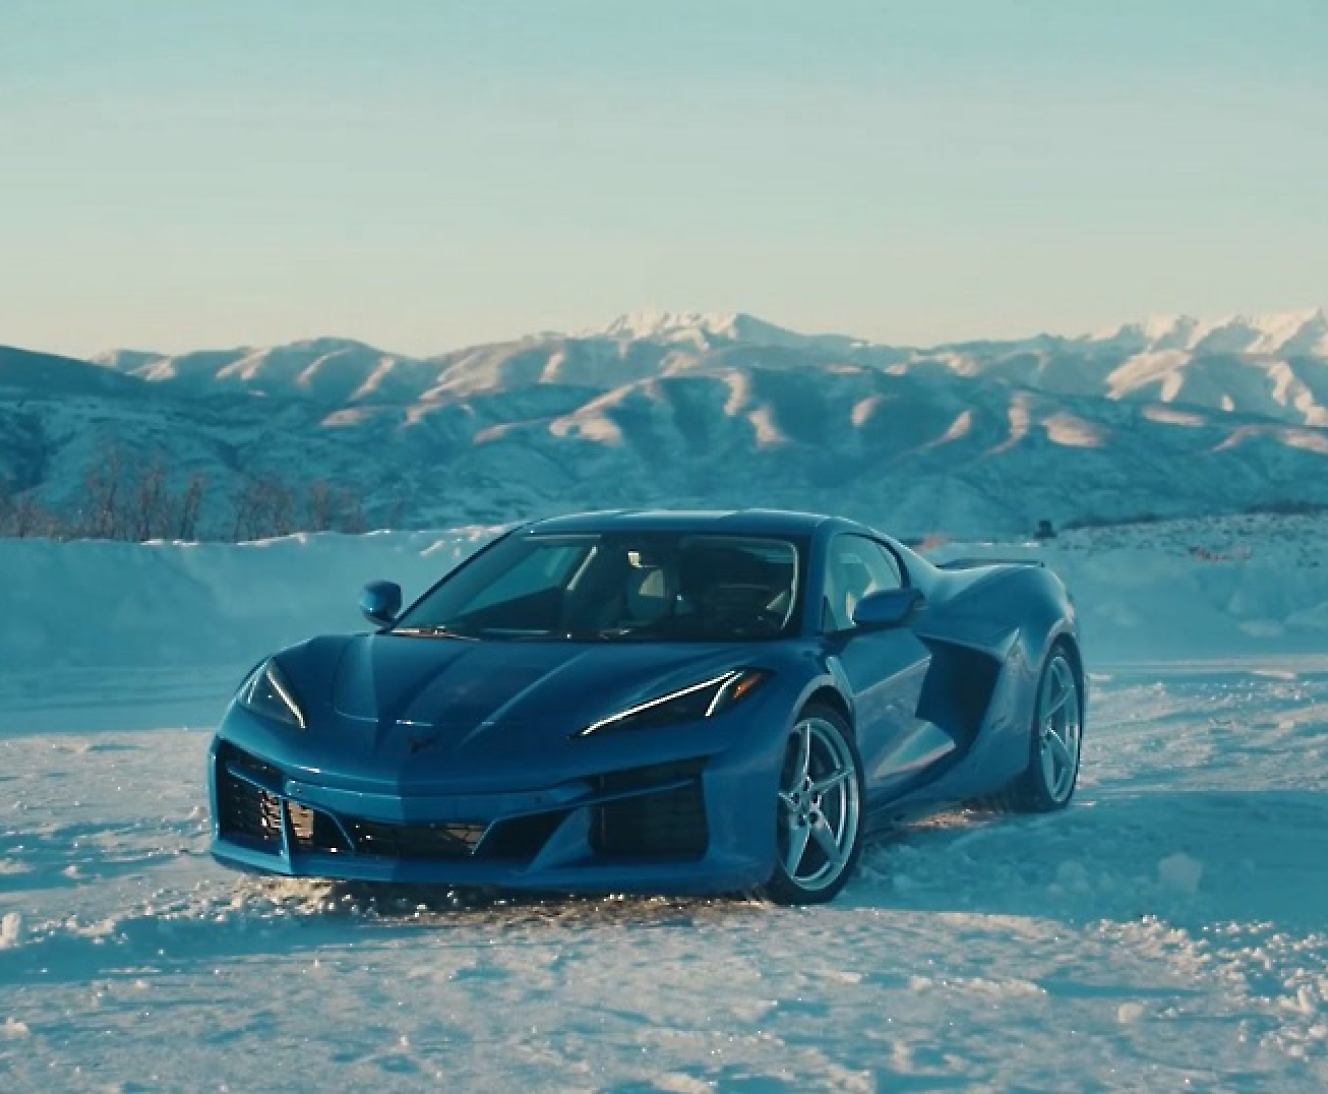 A blue sports car parked on a snow-covered terrain with mountains in the background